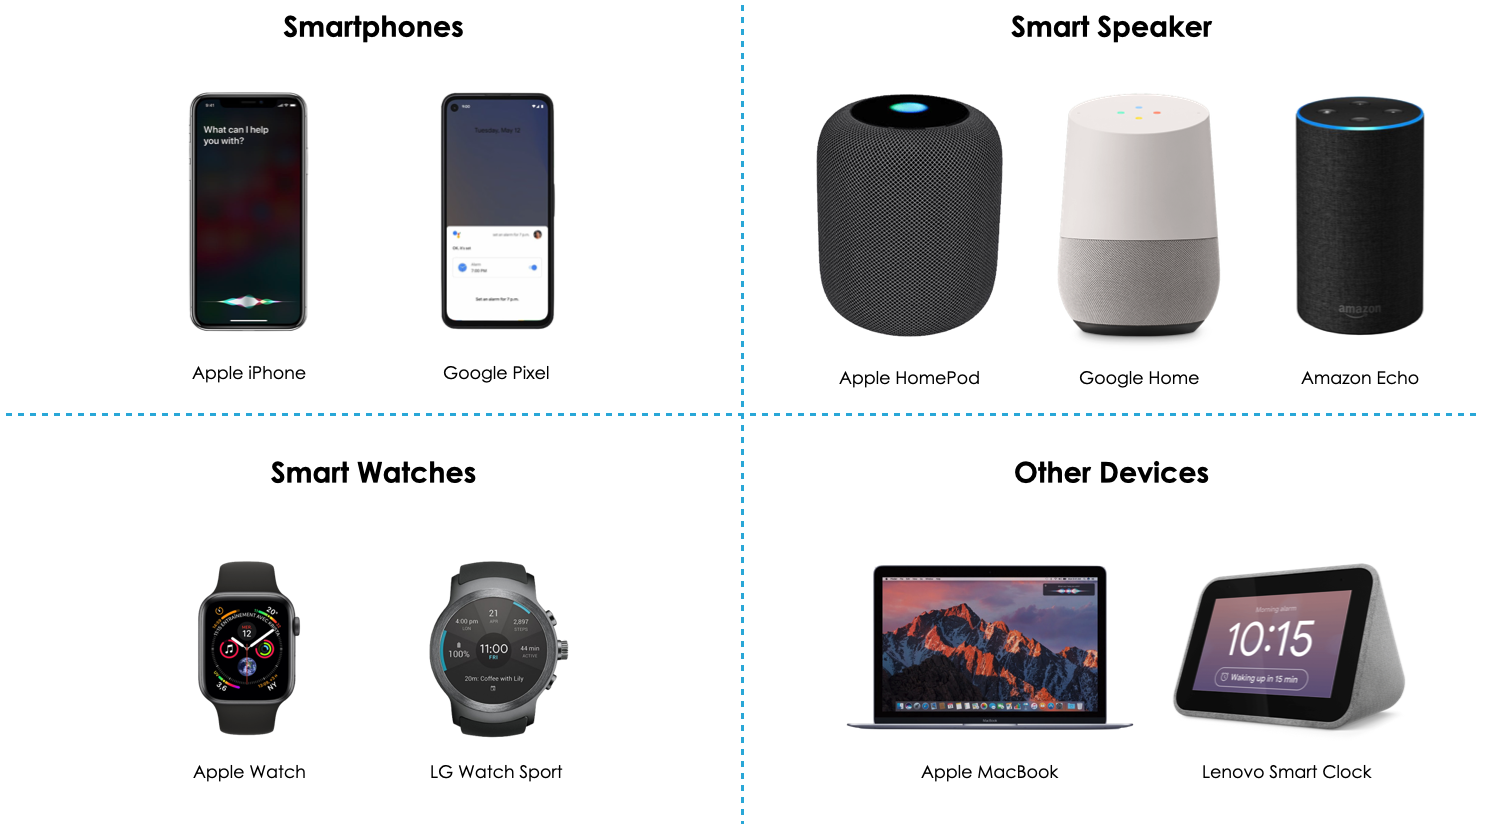 Overview_of_Digital_Assistant_Devices